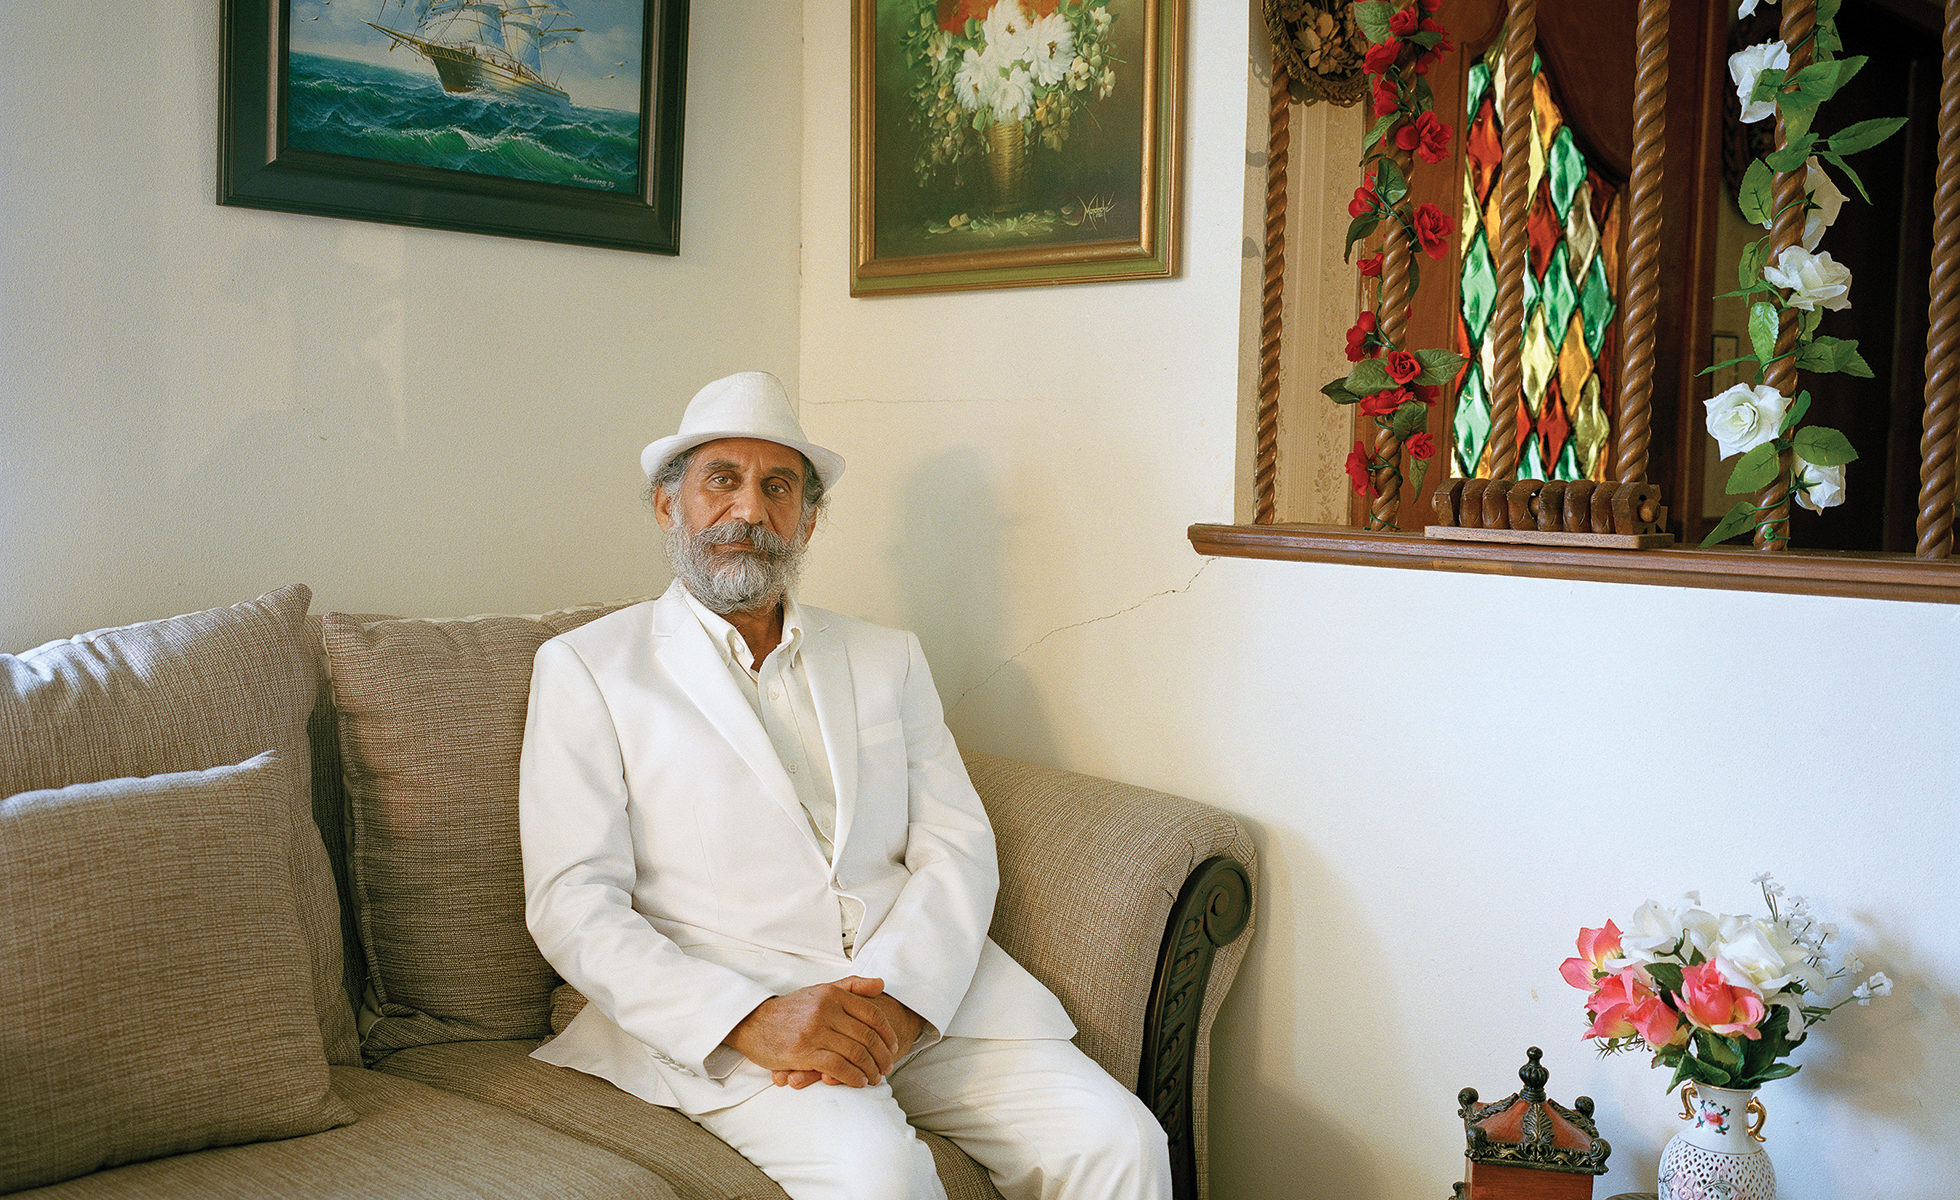 Shahram Ebadfardzadeh, a Mandaean religious and community leader, at home in San Antonio. He and his family left Iran nearly a decade ago after being persecuted for their faith. Being Mandaean restricted his ability to go to school and find a job. He says that Texas is a good place for him and his family because it has one of the largest populations of Mandaeans in the country: “When you see some faces you know, you don’t feel alone.”